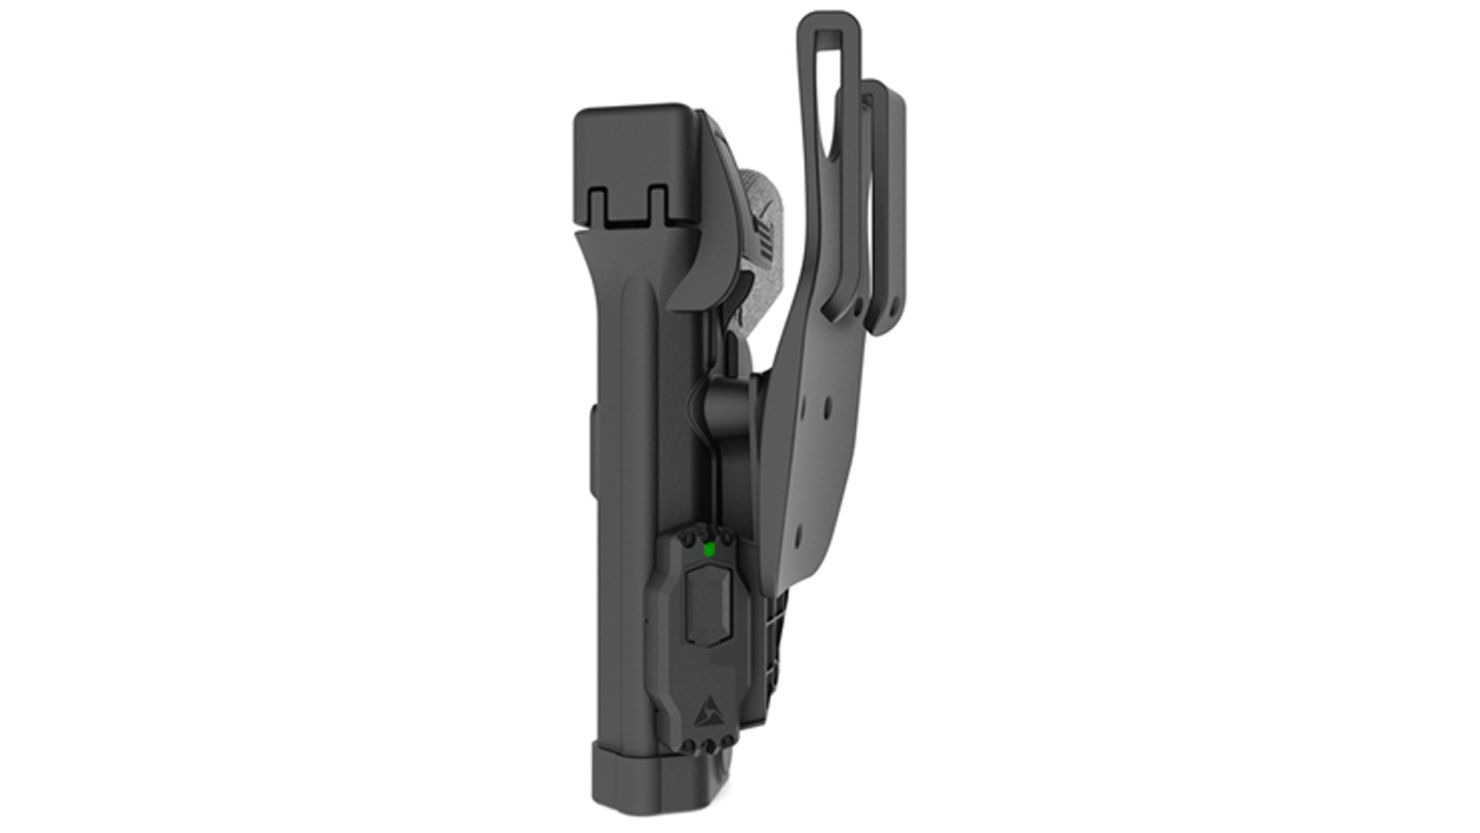 The cameras are activated by a sensor, seen here with a green light as it might look mounted to a gun holster.